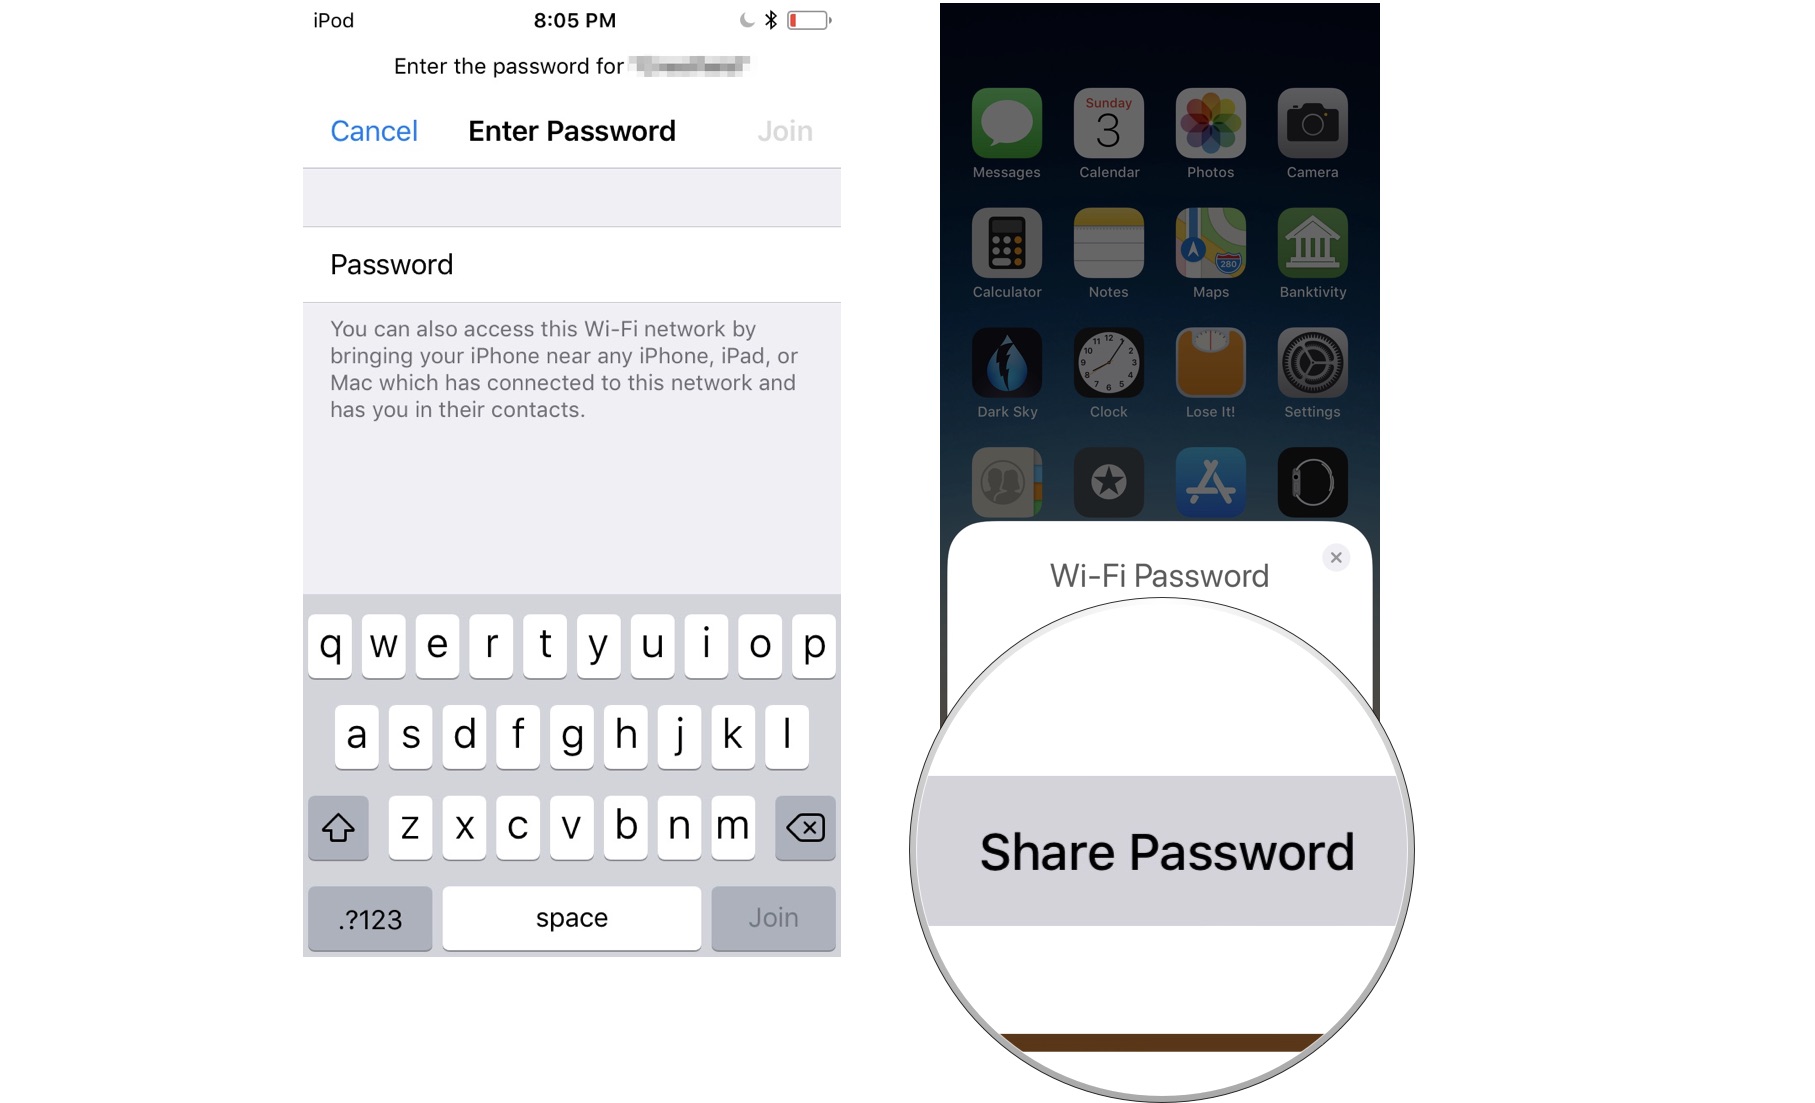 Tap Share Password from your iPhone